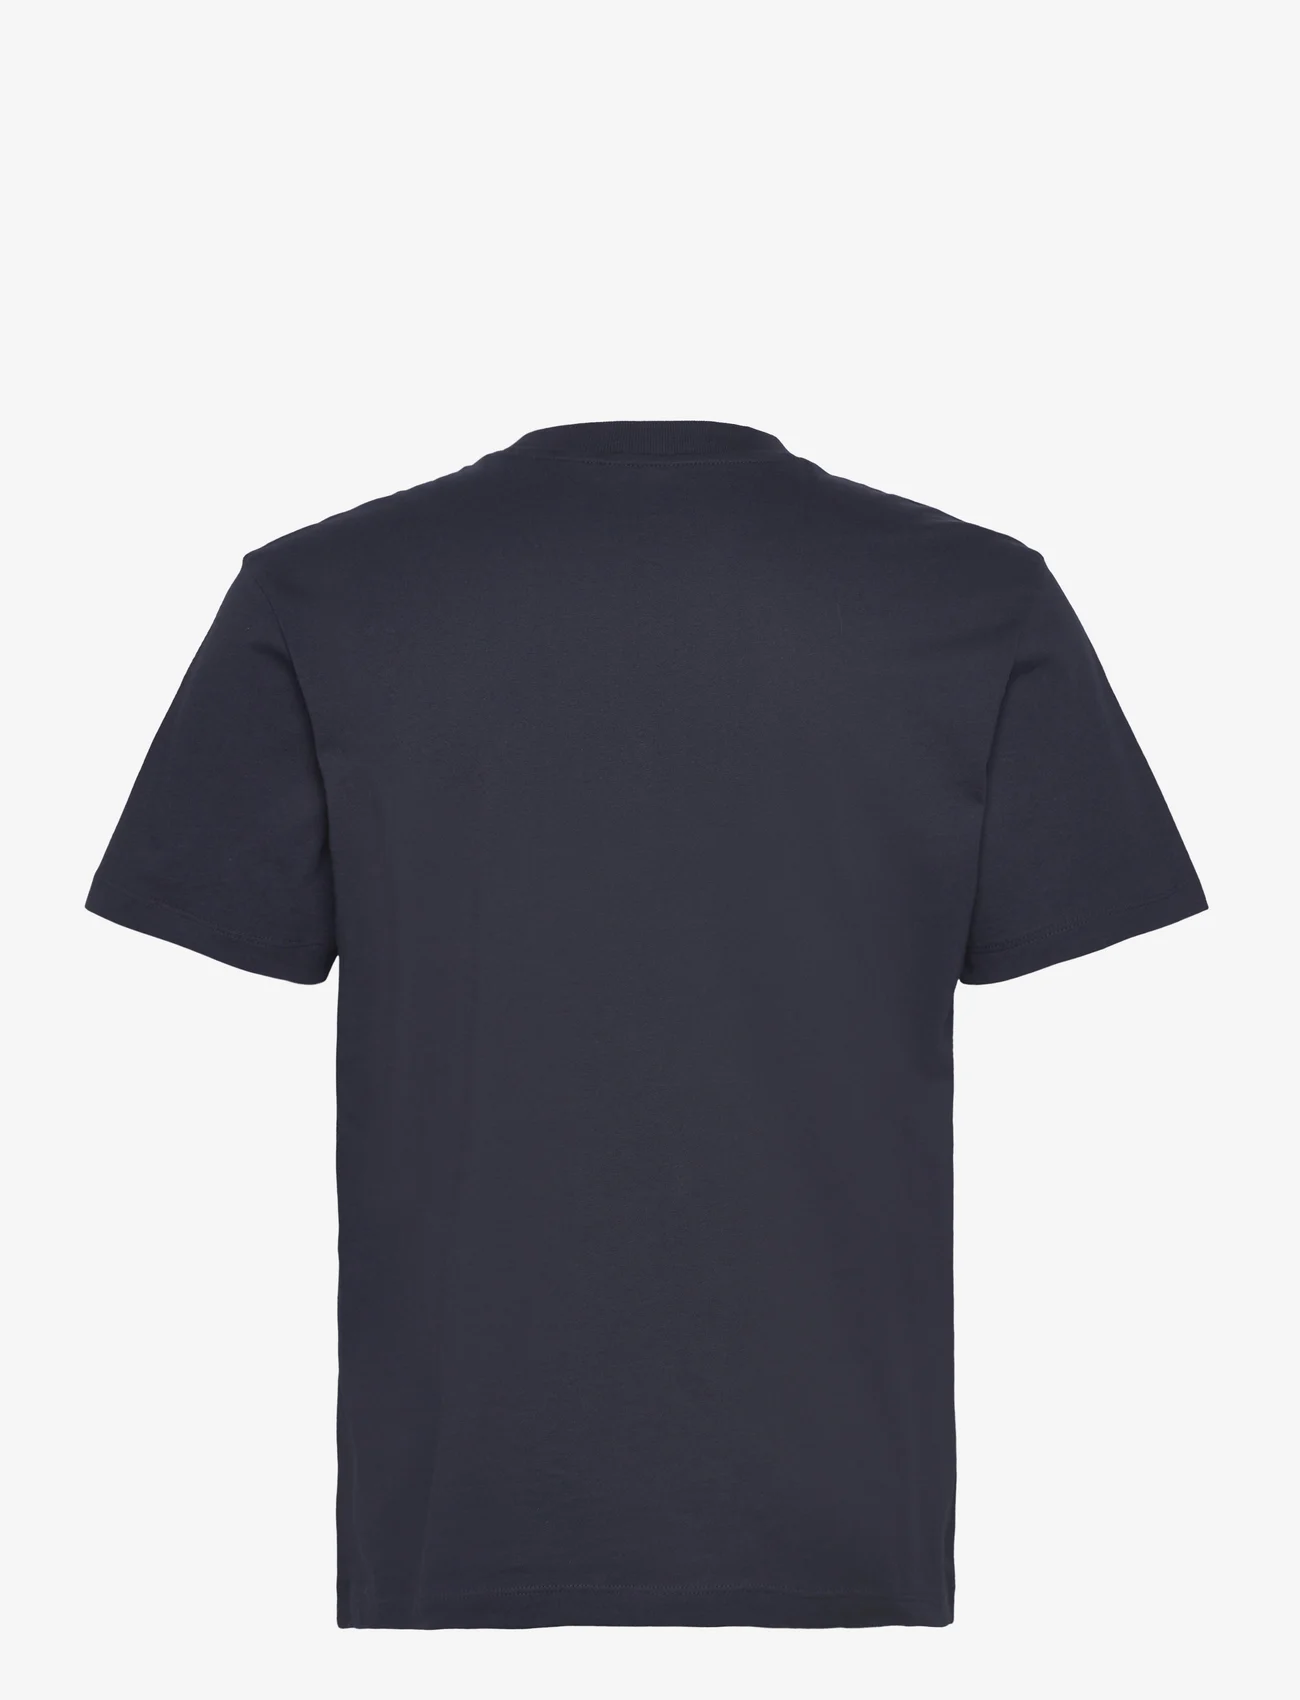 Tom Tailor - relaxed printed t-shirt - lowest prices - sky captain blue - 1